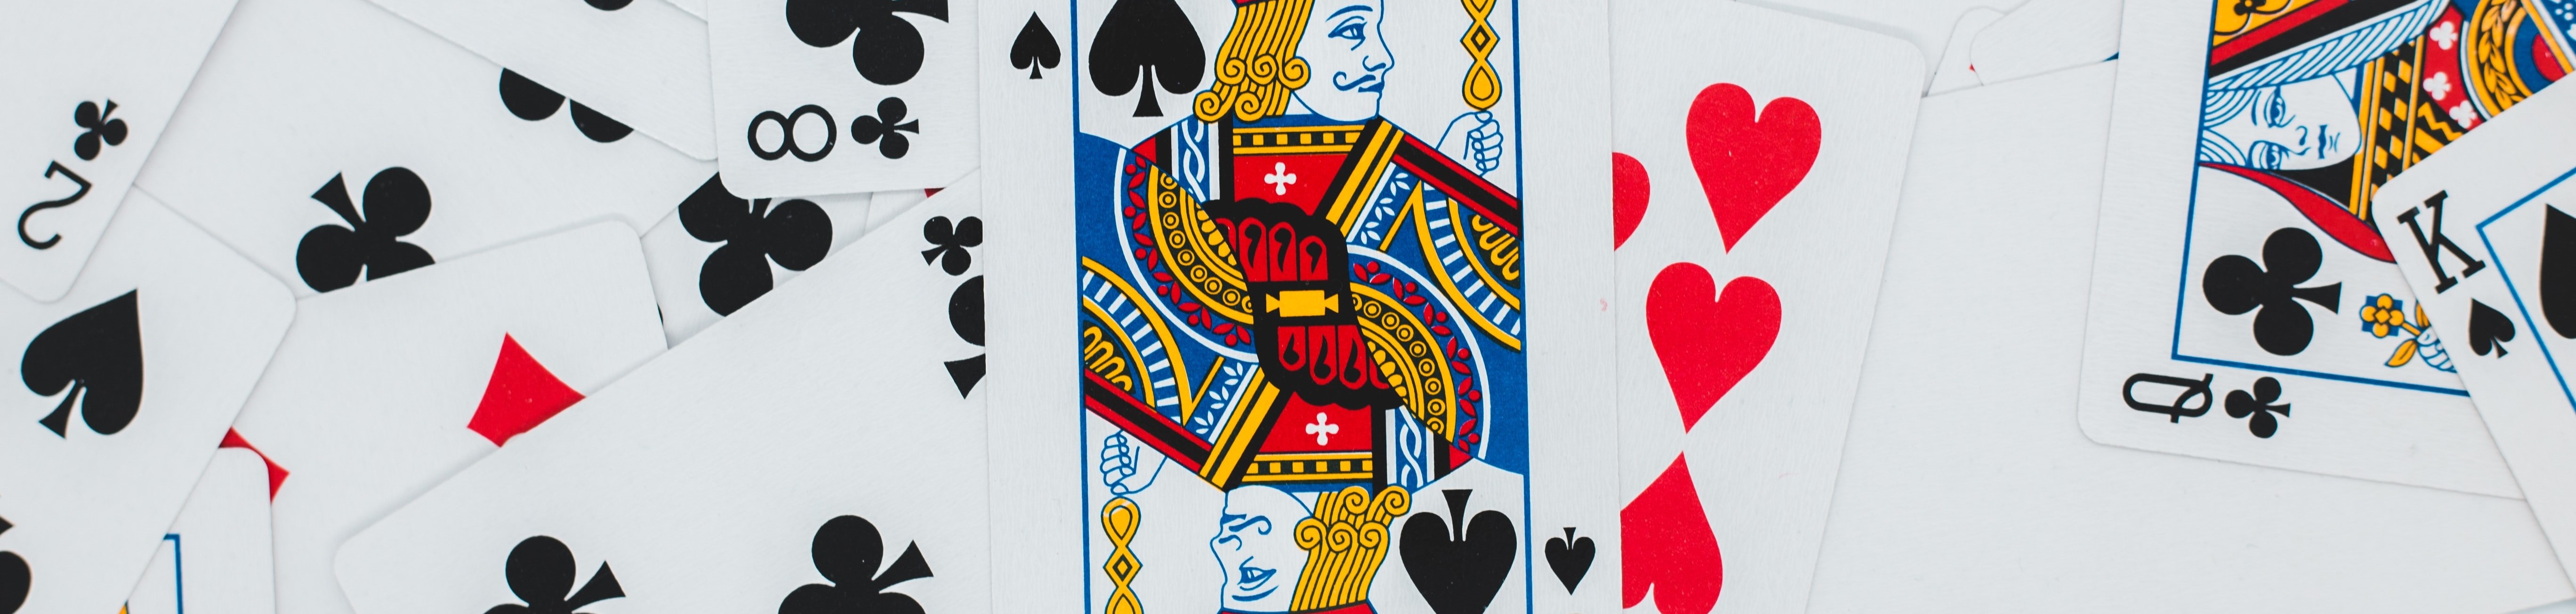 Playing cards with a king of spades as the center card.